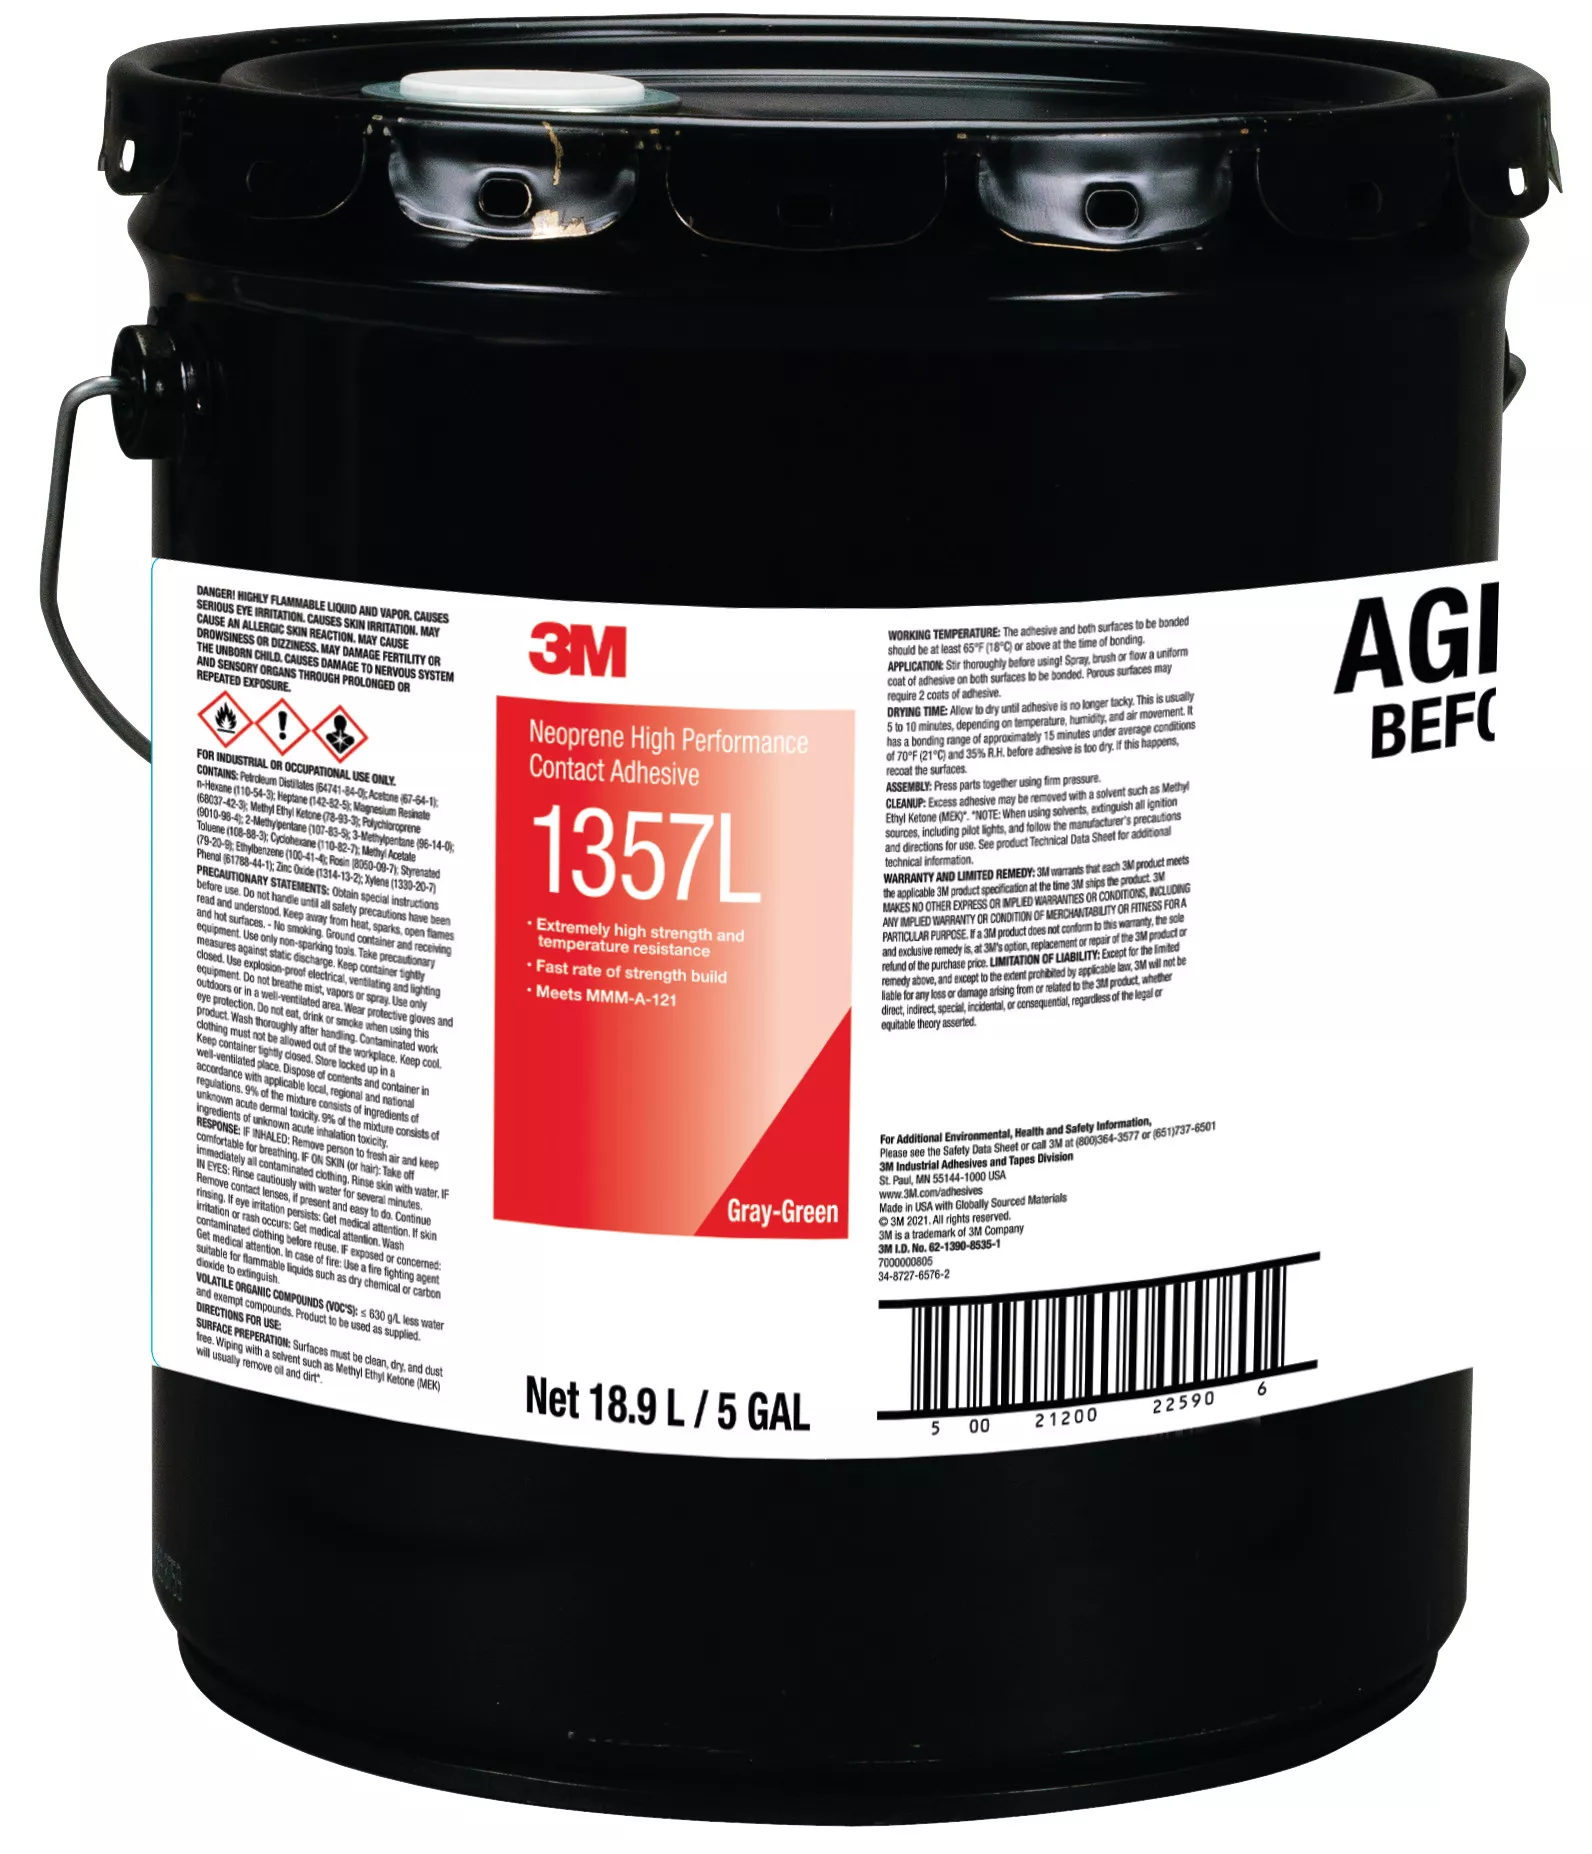 3M™ Neoprene High Performance Contact Adhesive 1357L, Gray-Green, 5
Gallon (Pail), 1 Can/Drum